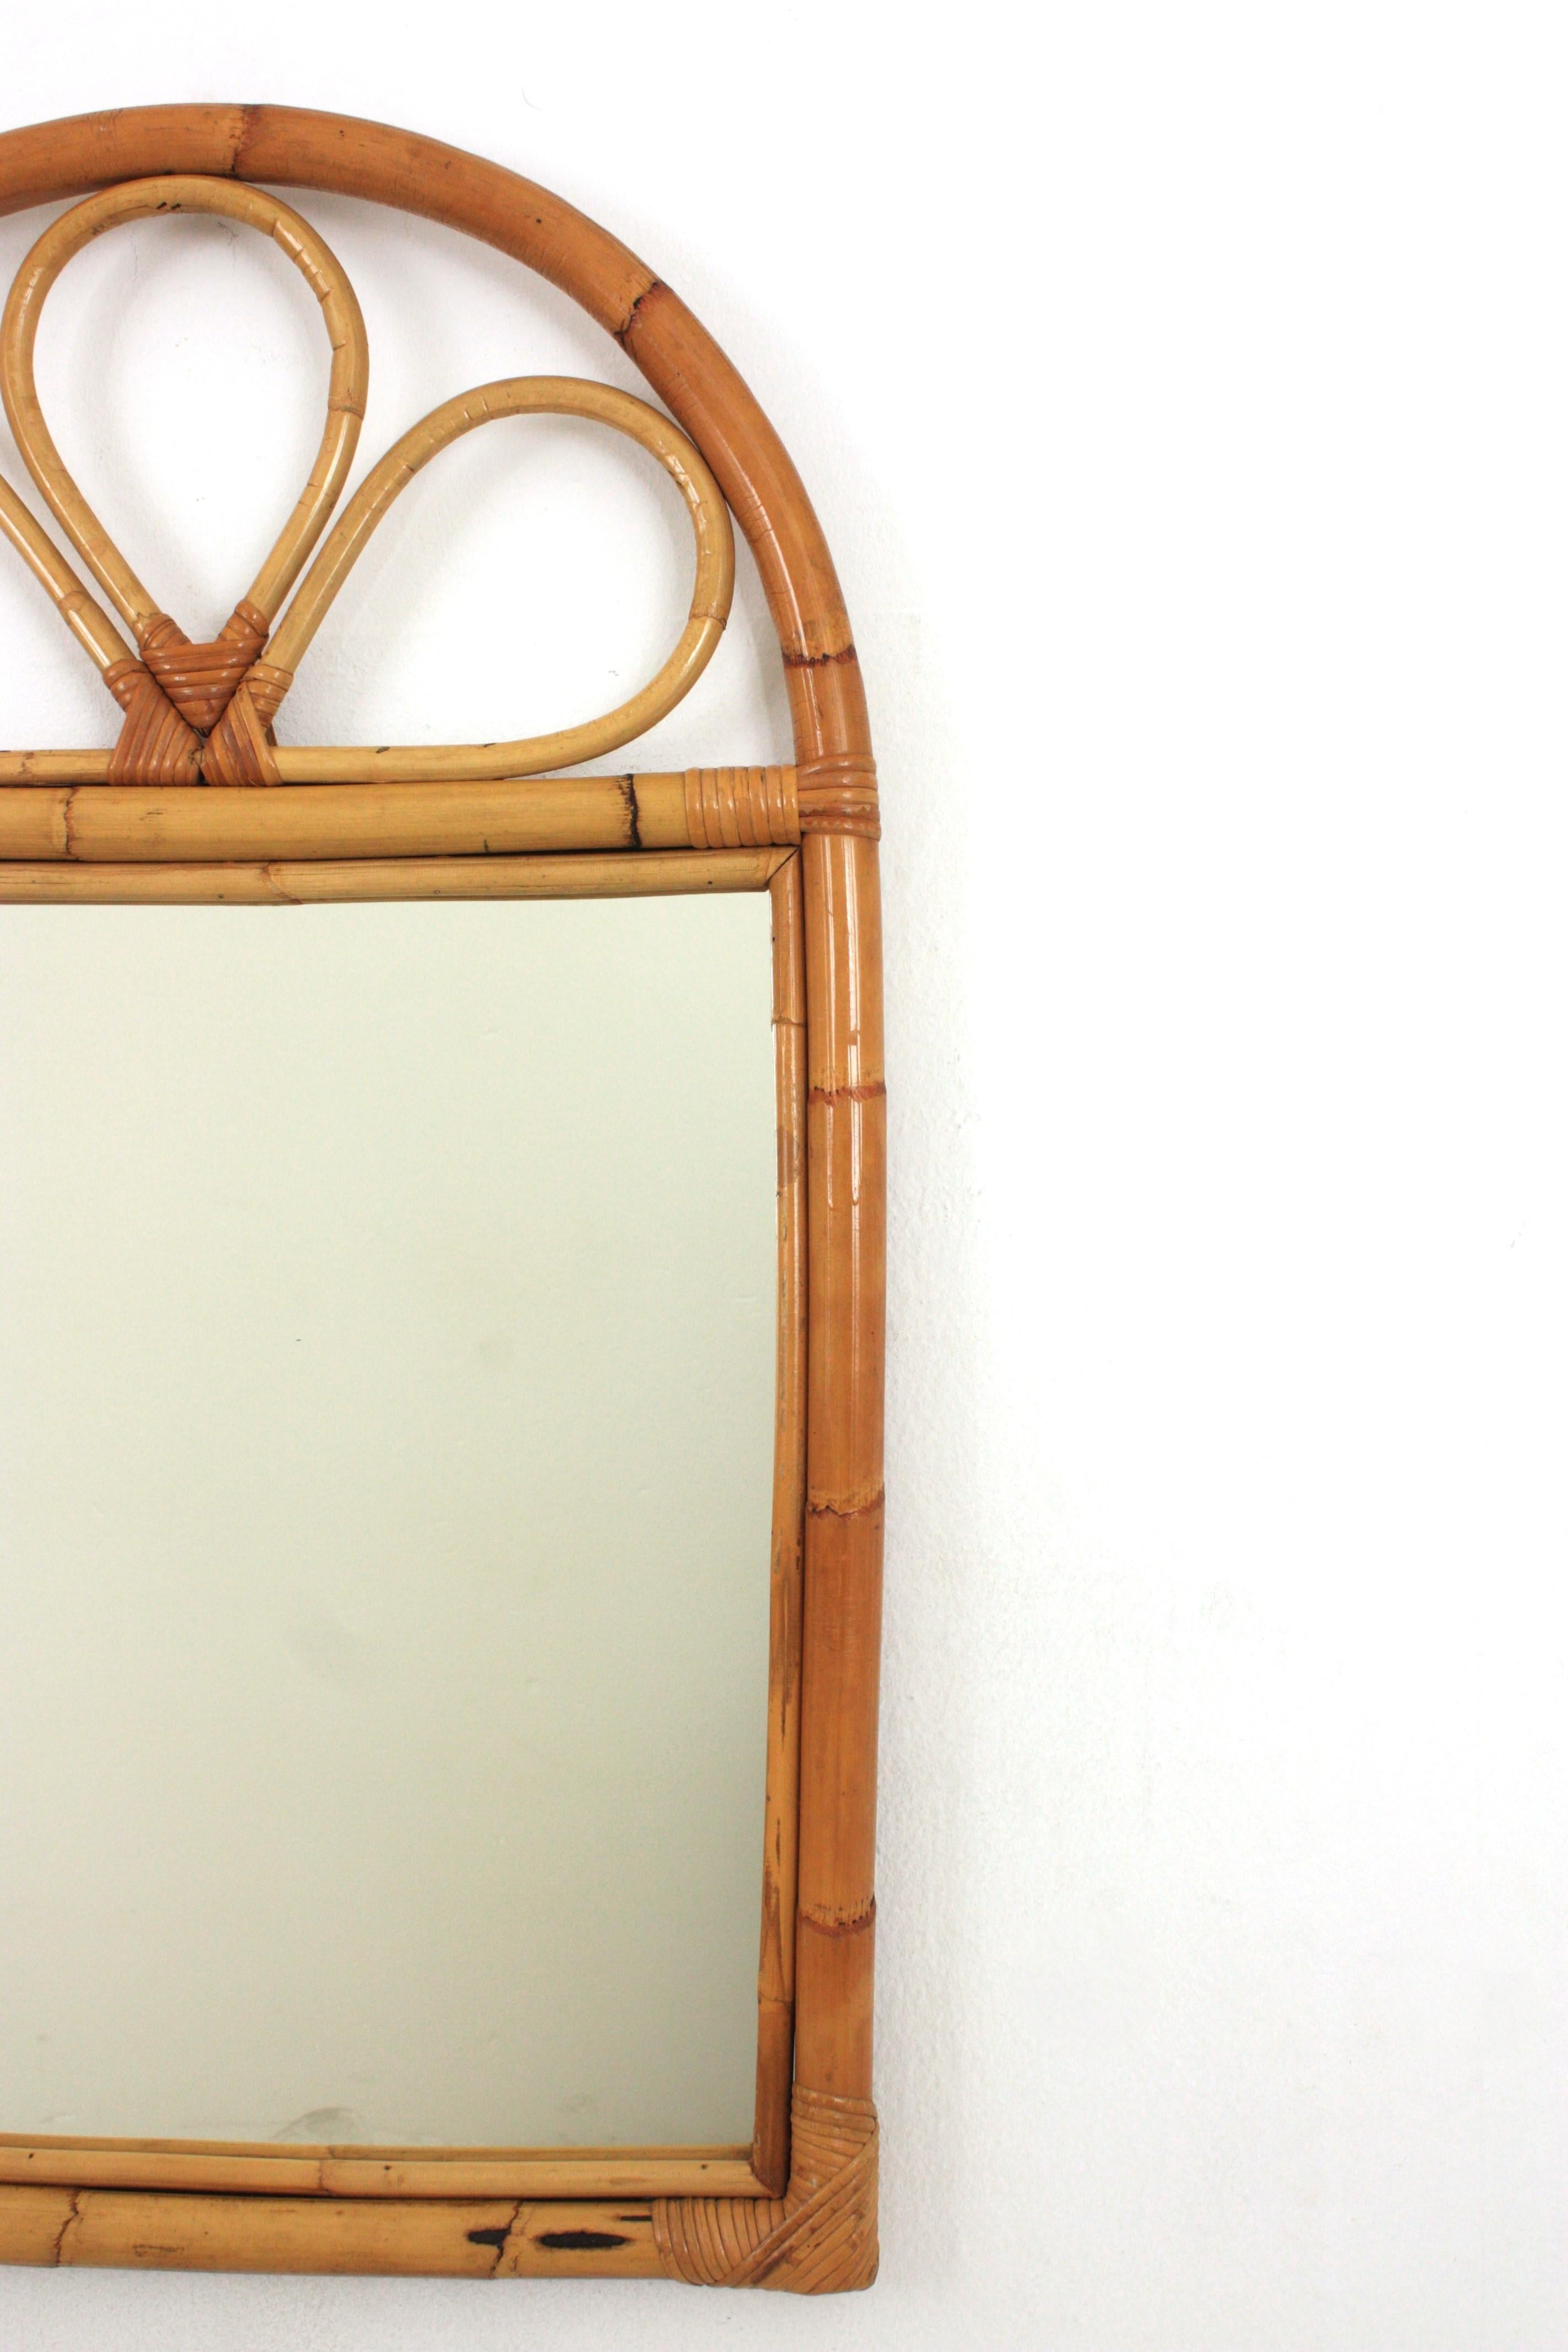 Spanish Rattan Bamboo Mirror with Arched Top, 1960s For Sale 1